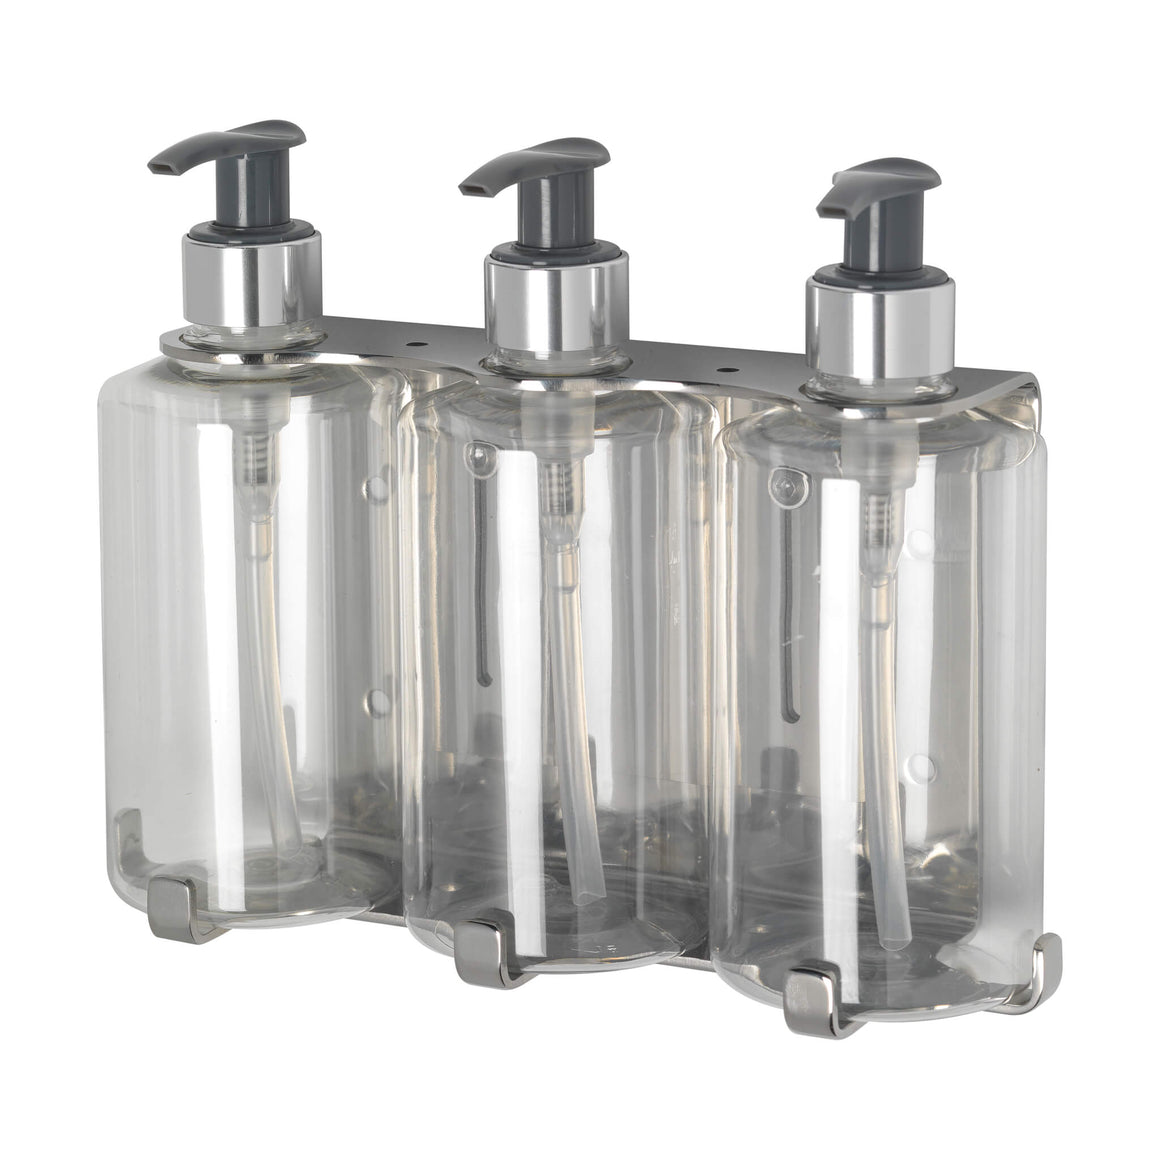 Triple 300ml Security Wall-Mounted Holder - Hand Polished